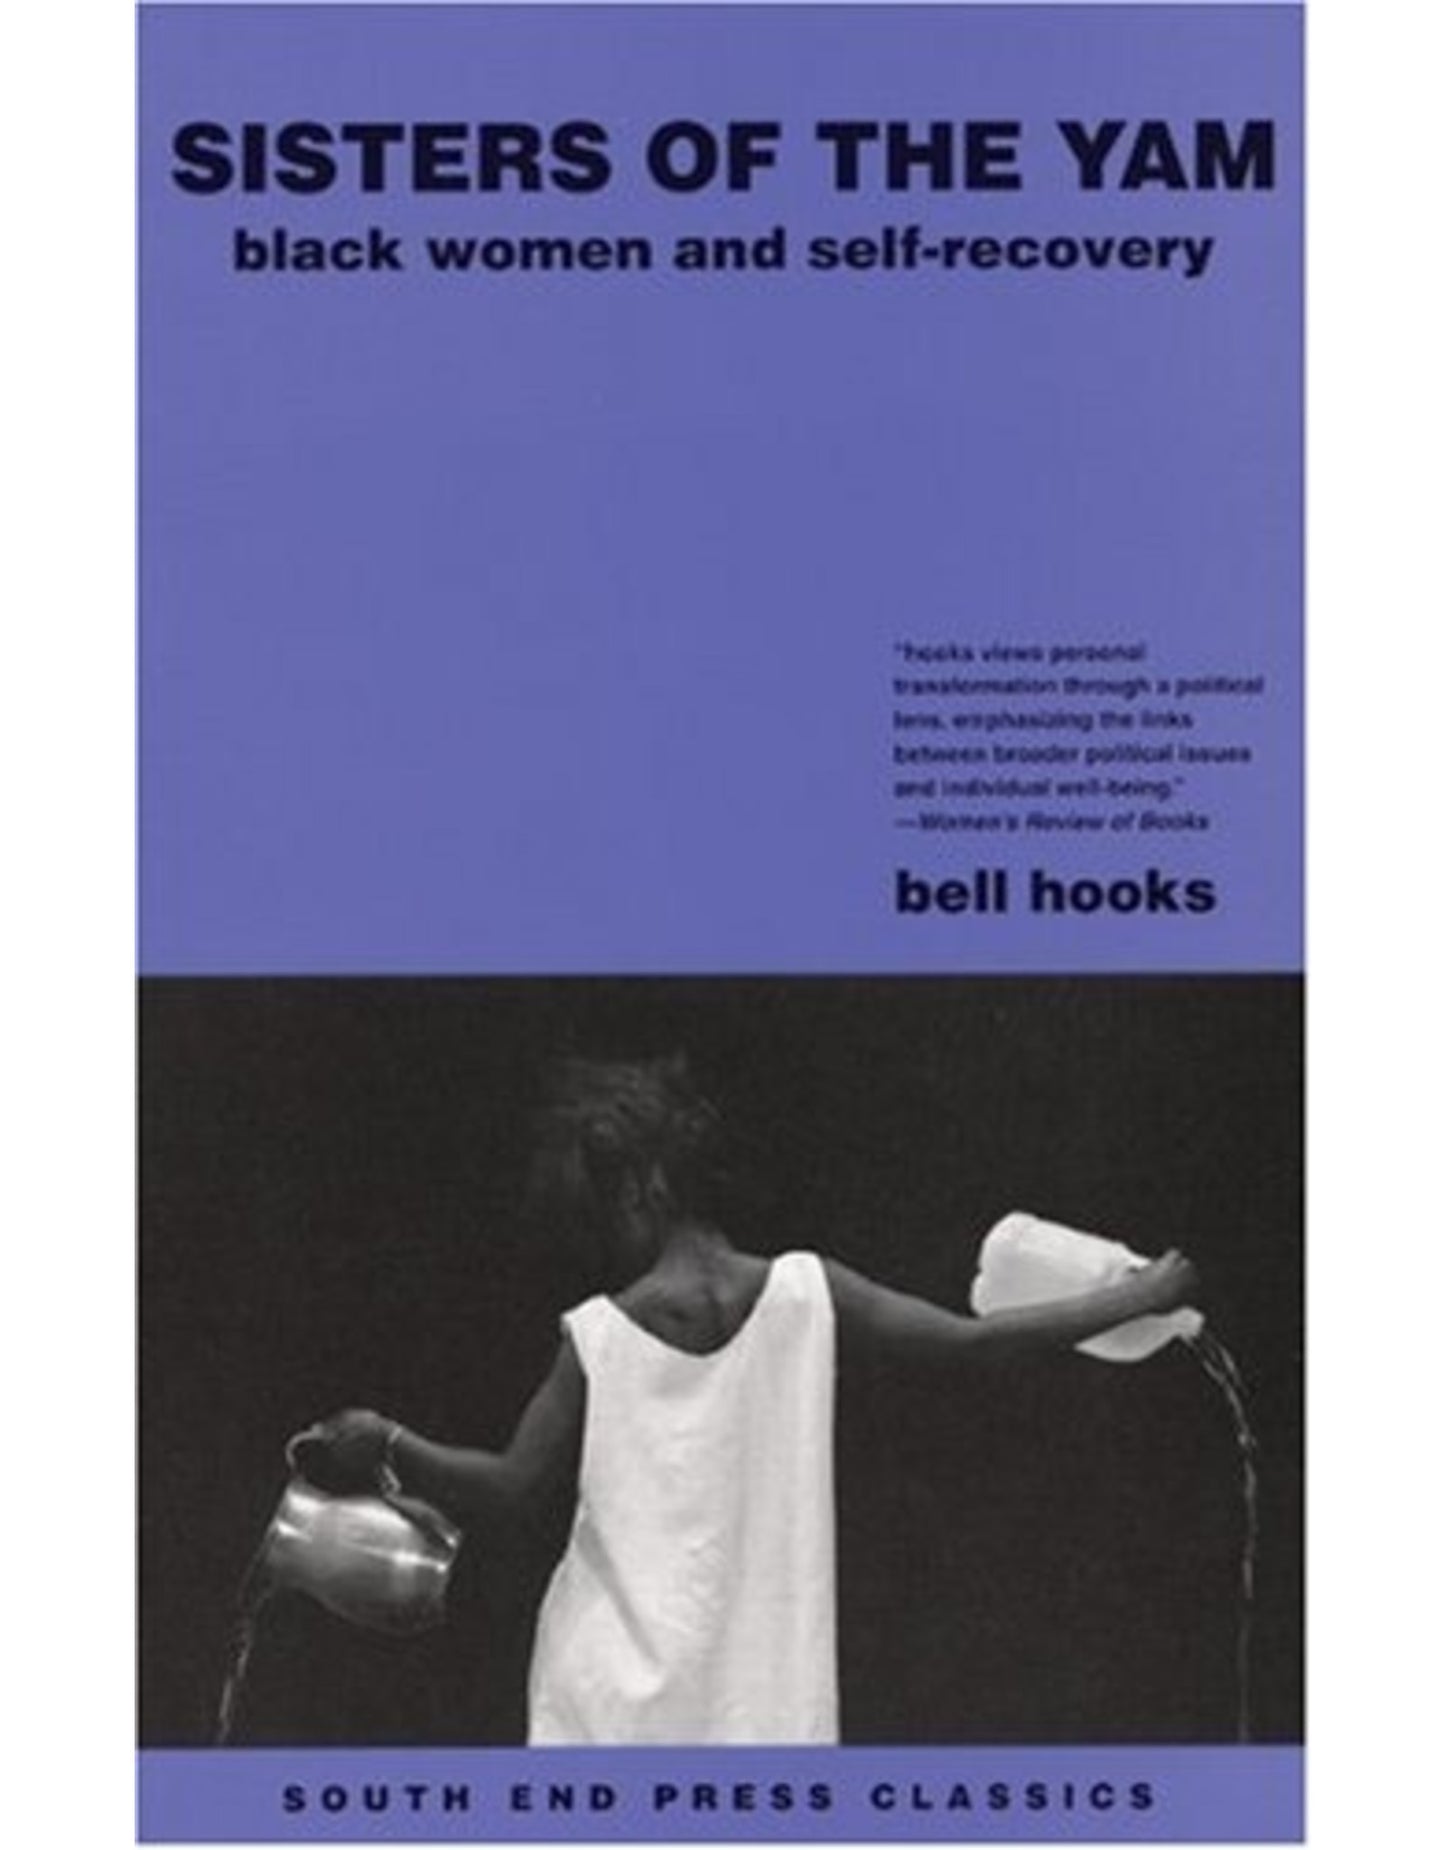 SISTERS OF THE YAM : BLACK WOMEN AND SELF-RECOVERY